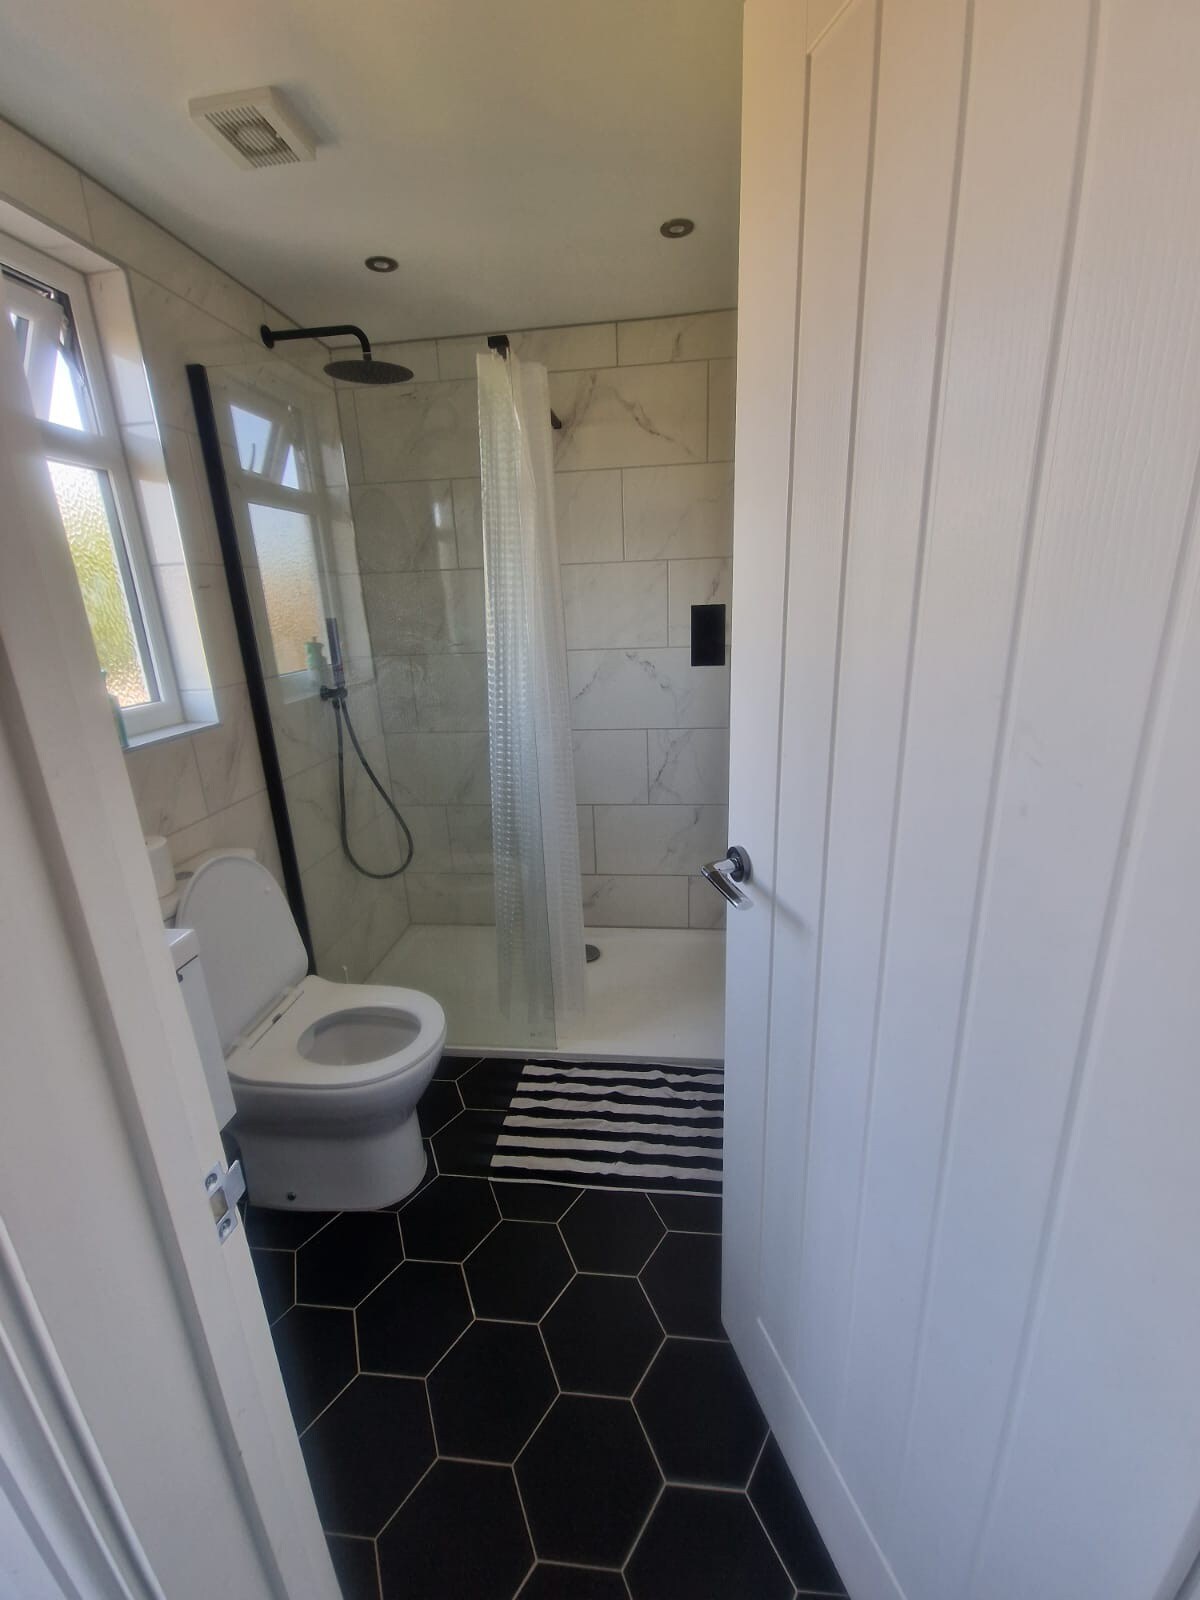 Spacious Private room with Ensuite Bathroom.